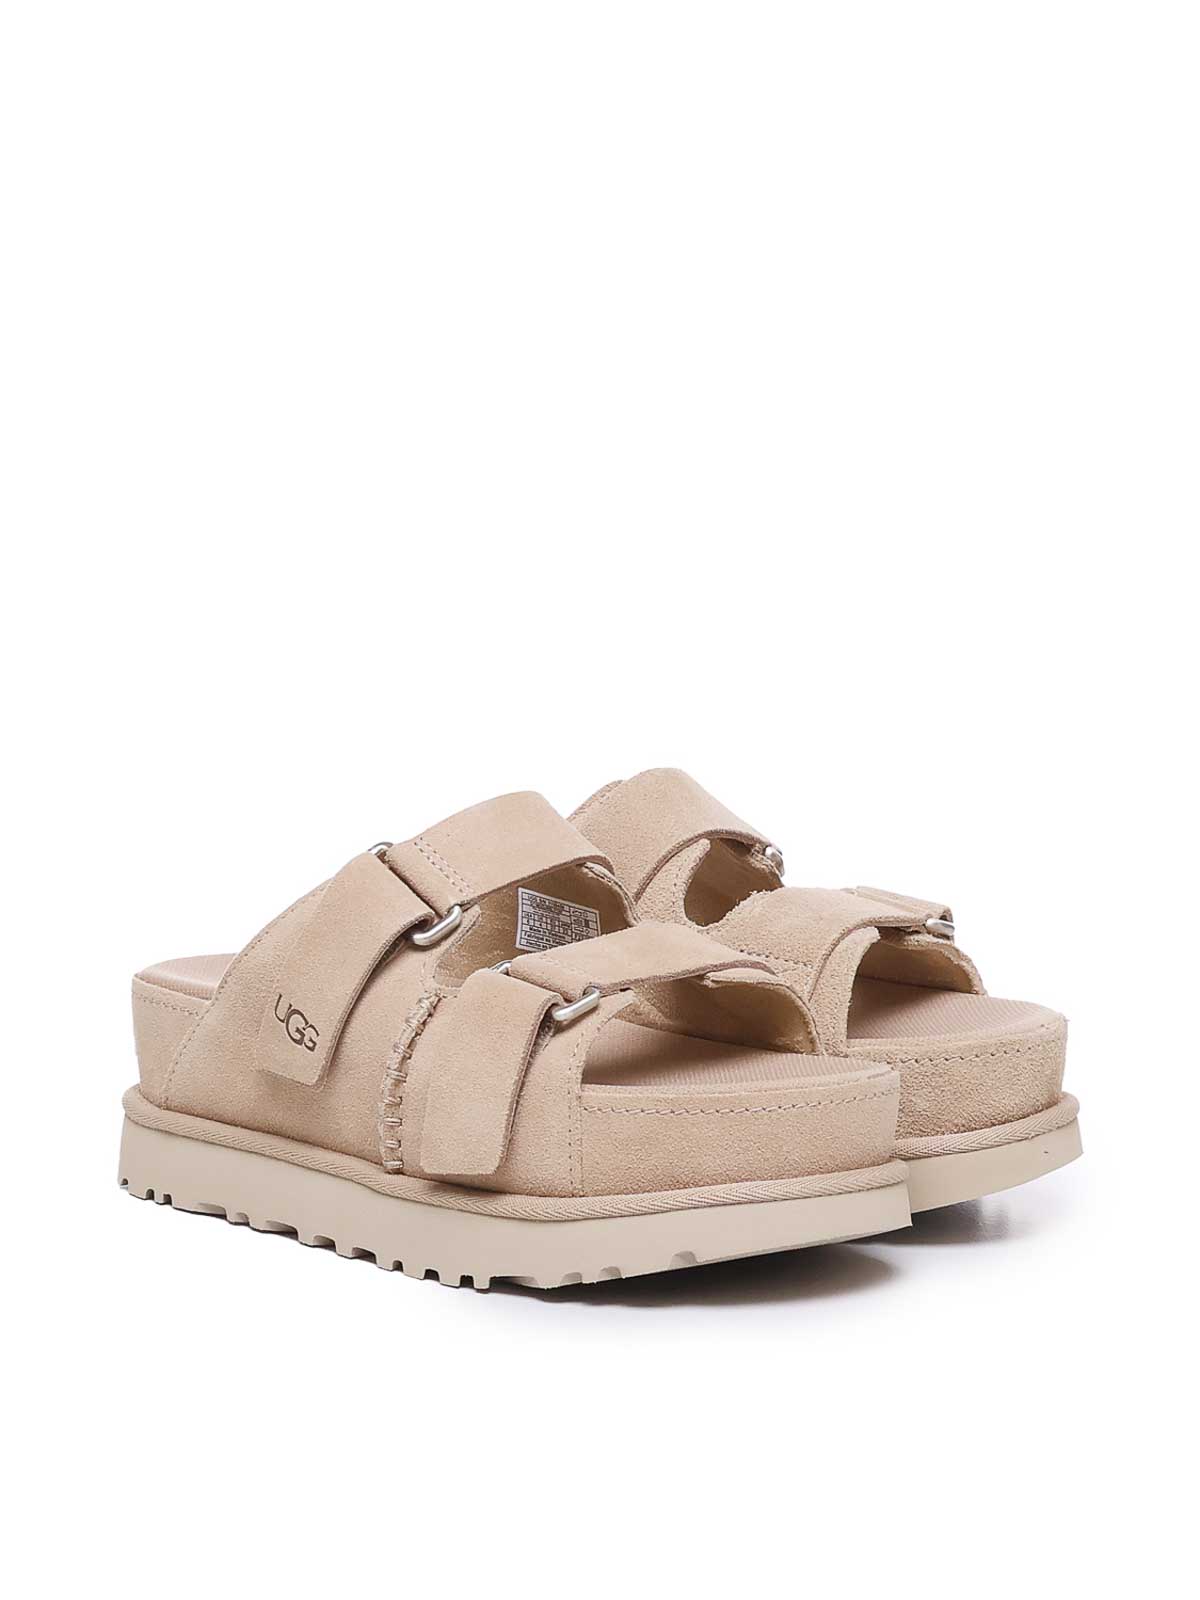 Shop Ugg Suede Sandals With Buckles In Color Carne Y Neutral